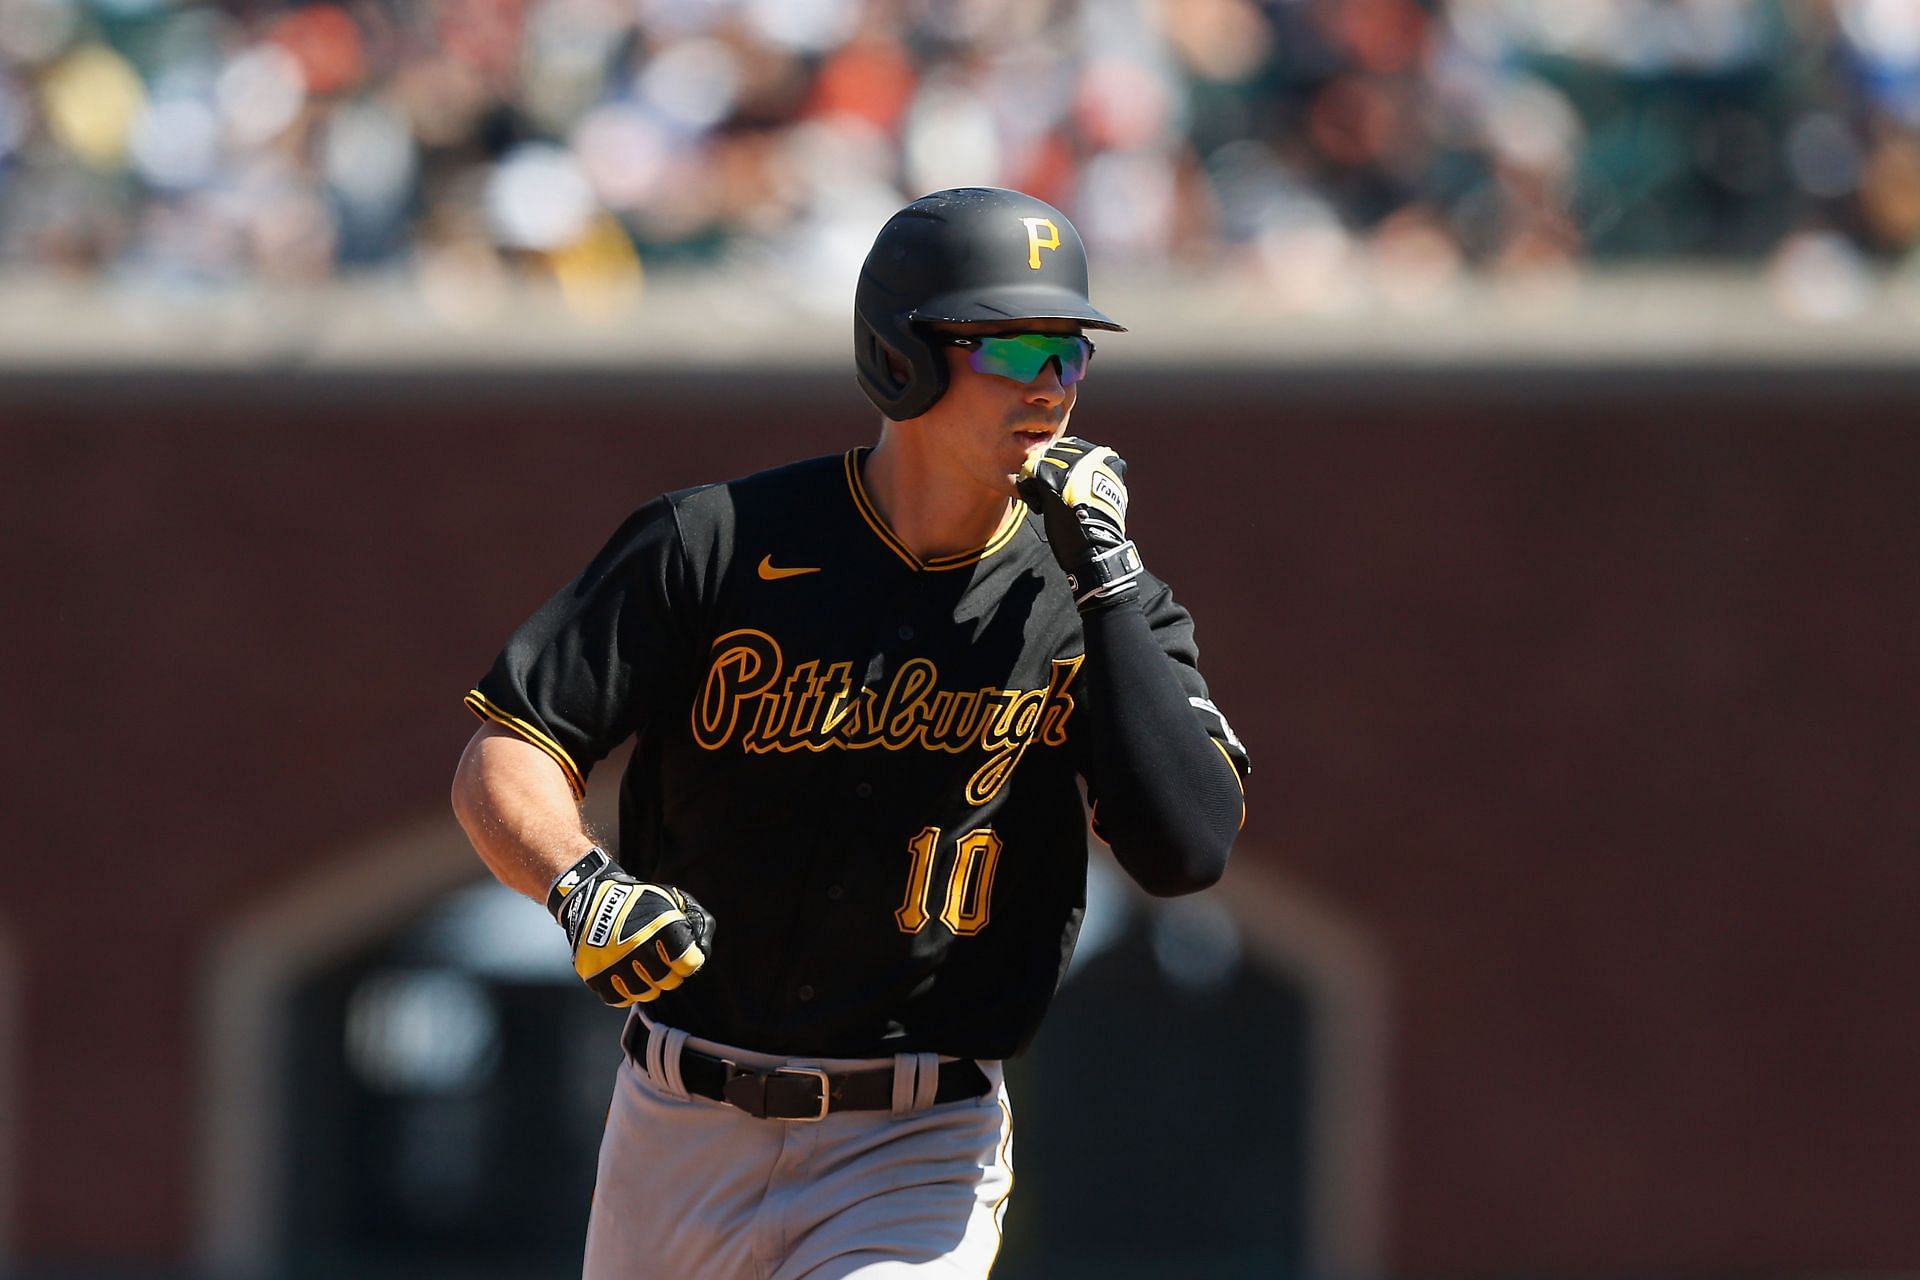 Bryan Reynolds of the Pirates in a game versus the San Francisco Giants